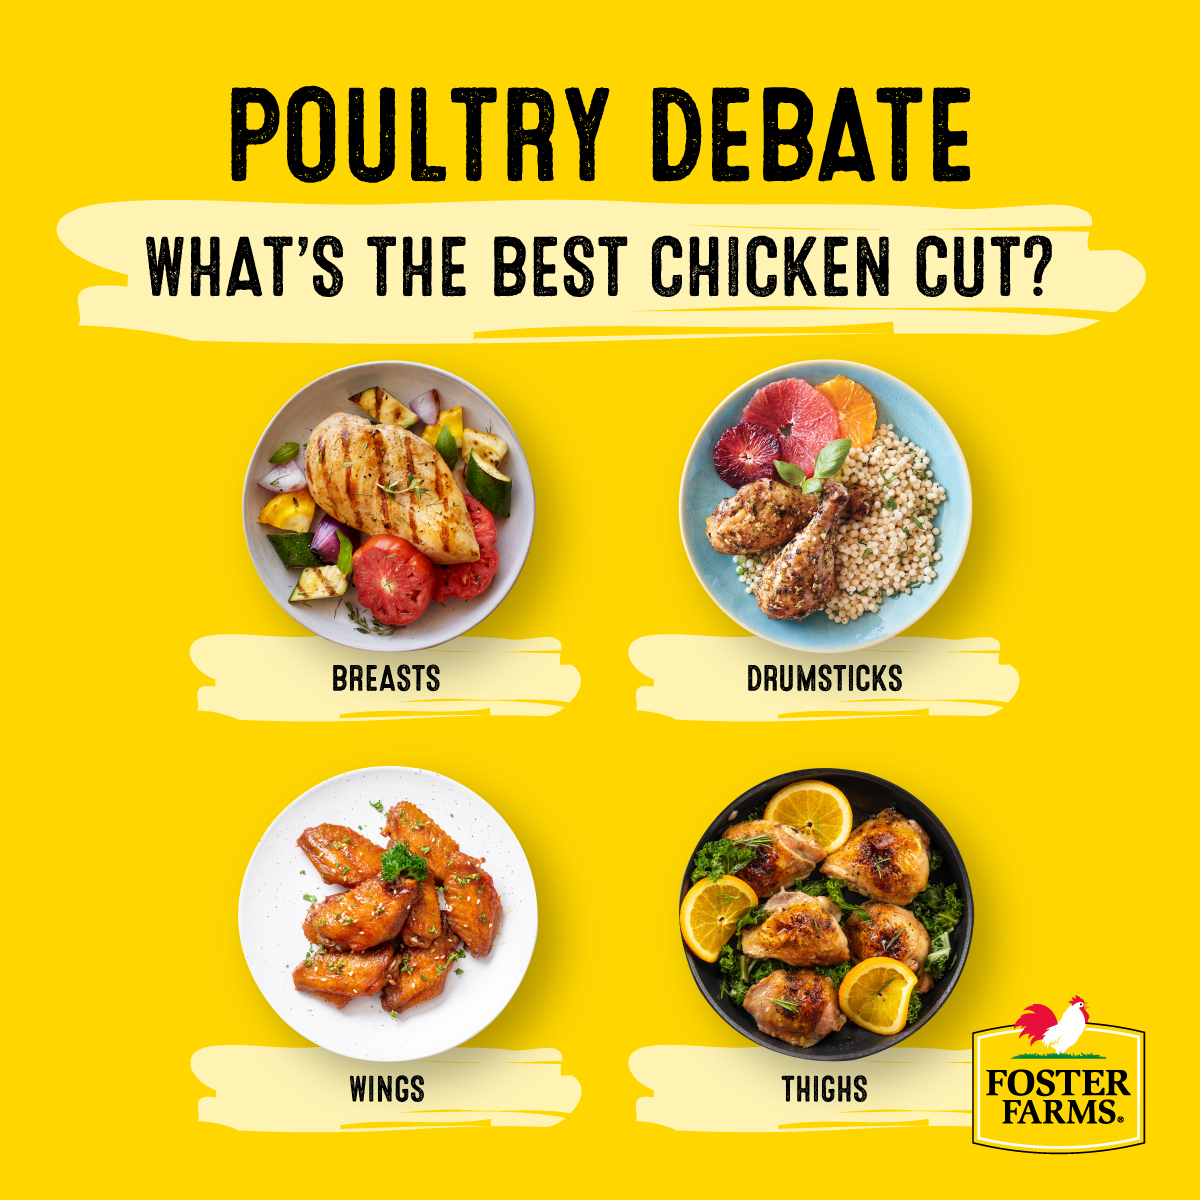 Let us know in the comments below! 👇🏼 #fosterfarms #poultry #chicken #chickenbreast #drumsticks #thighs #wings #chickenwings #debate #chickencuts